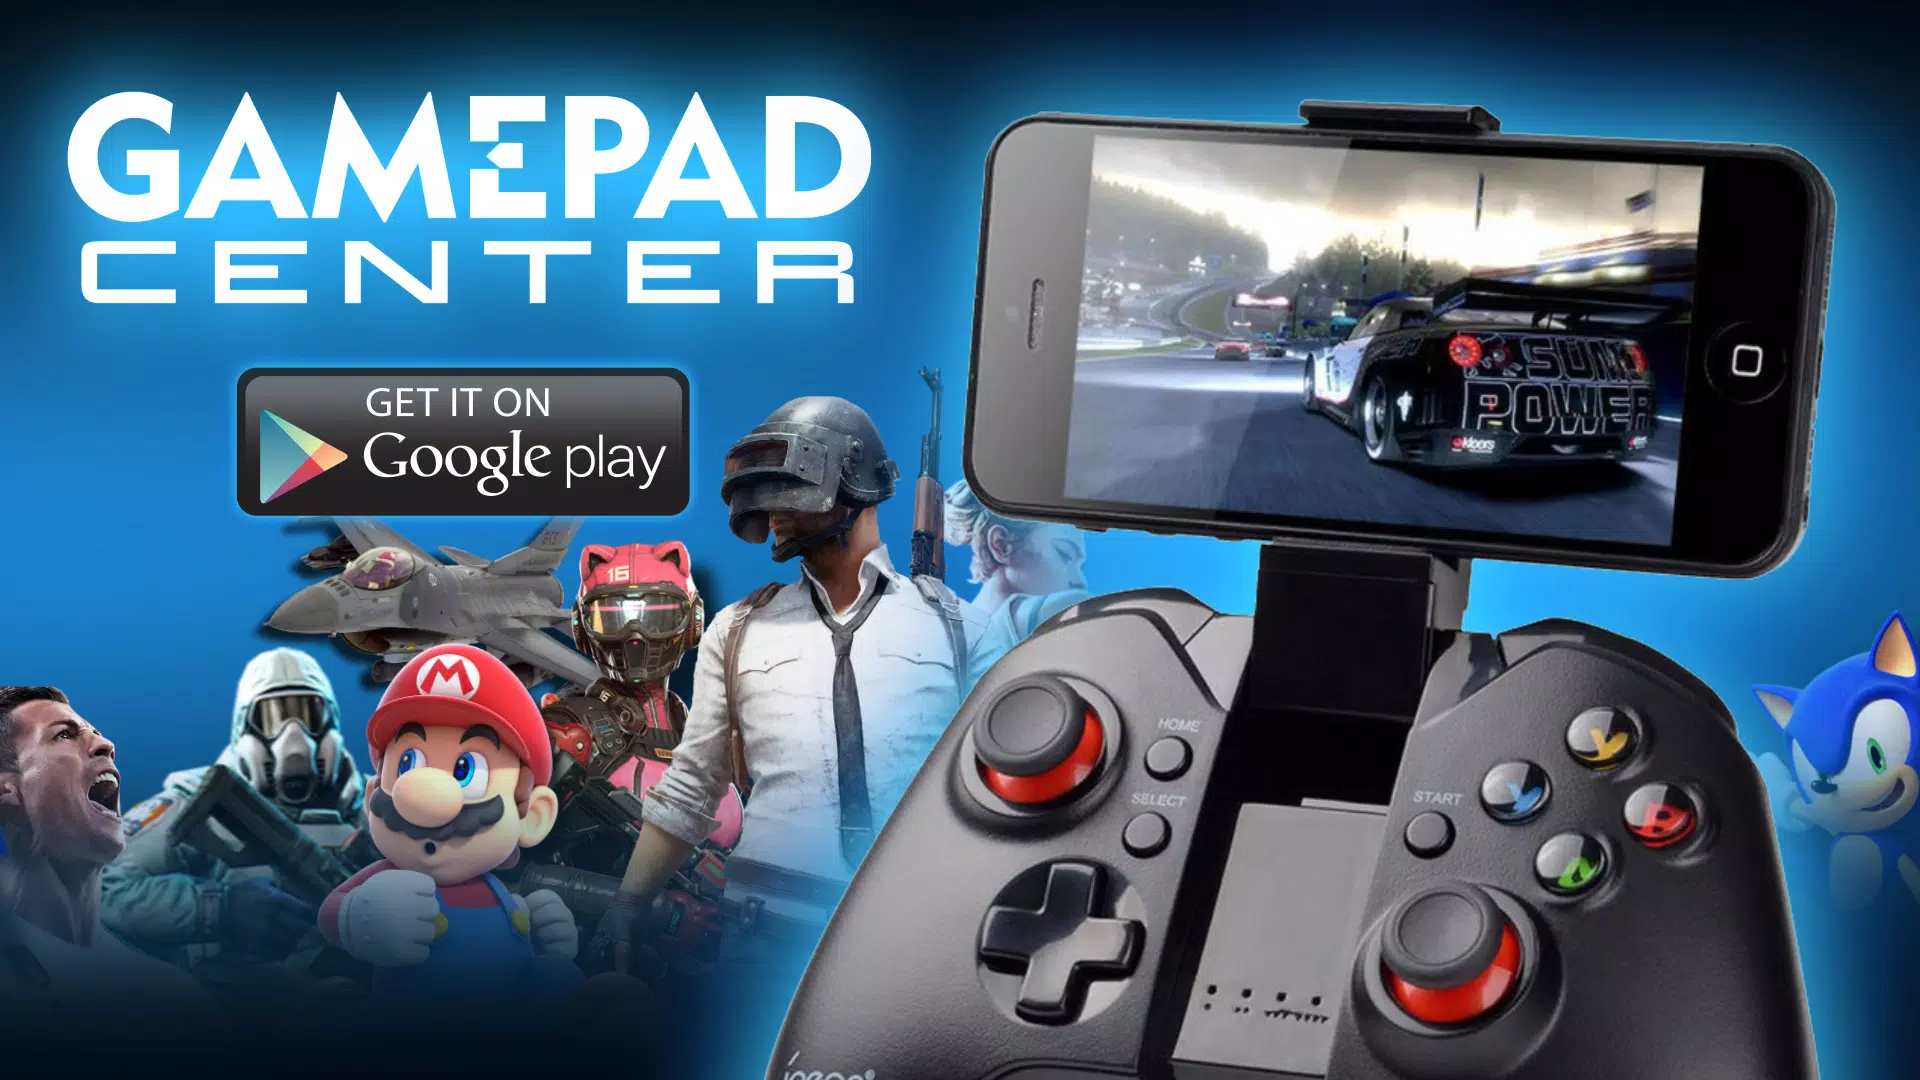 Gamepad Center for Android - APK Download